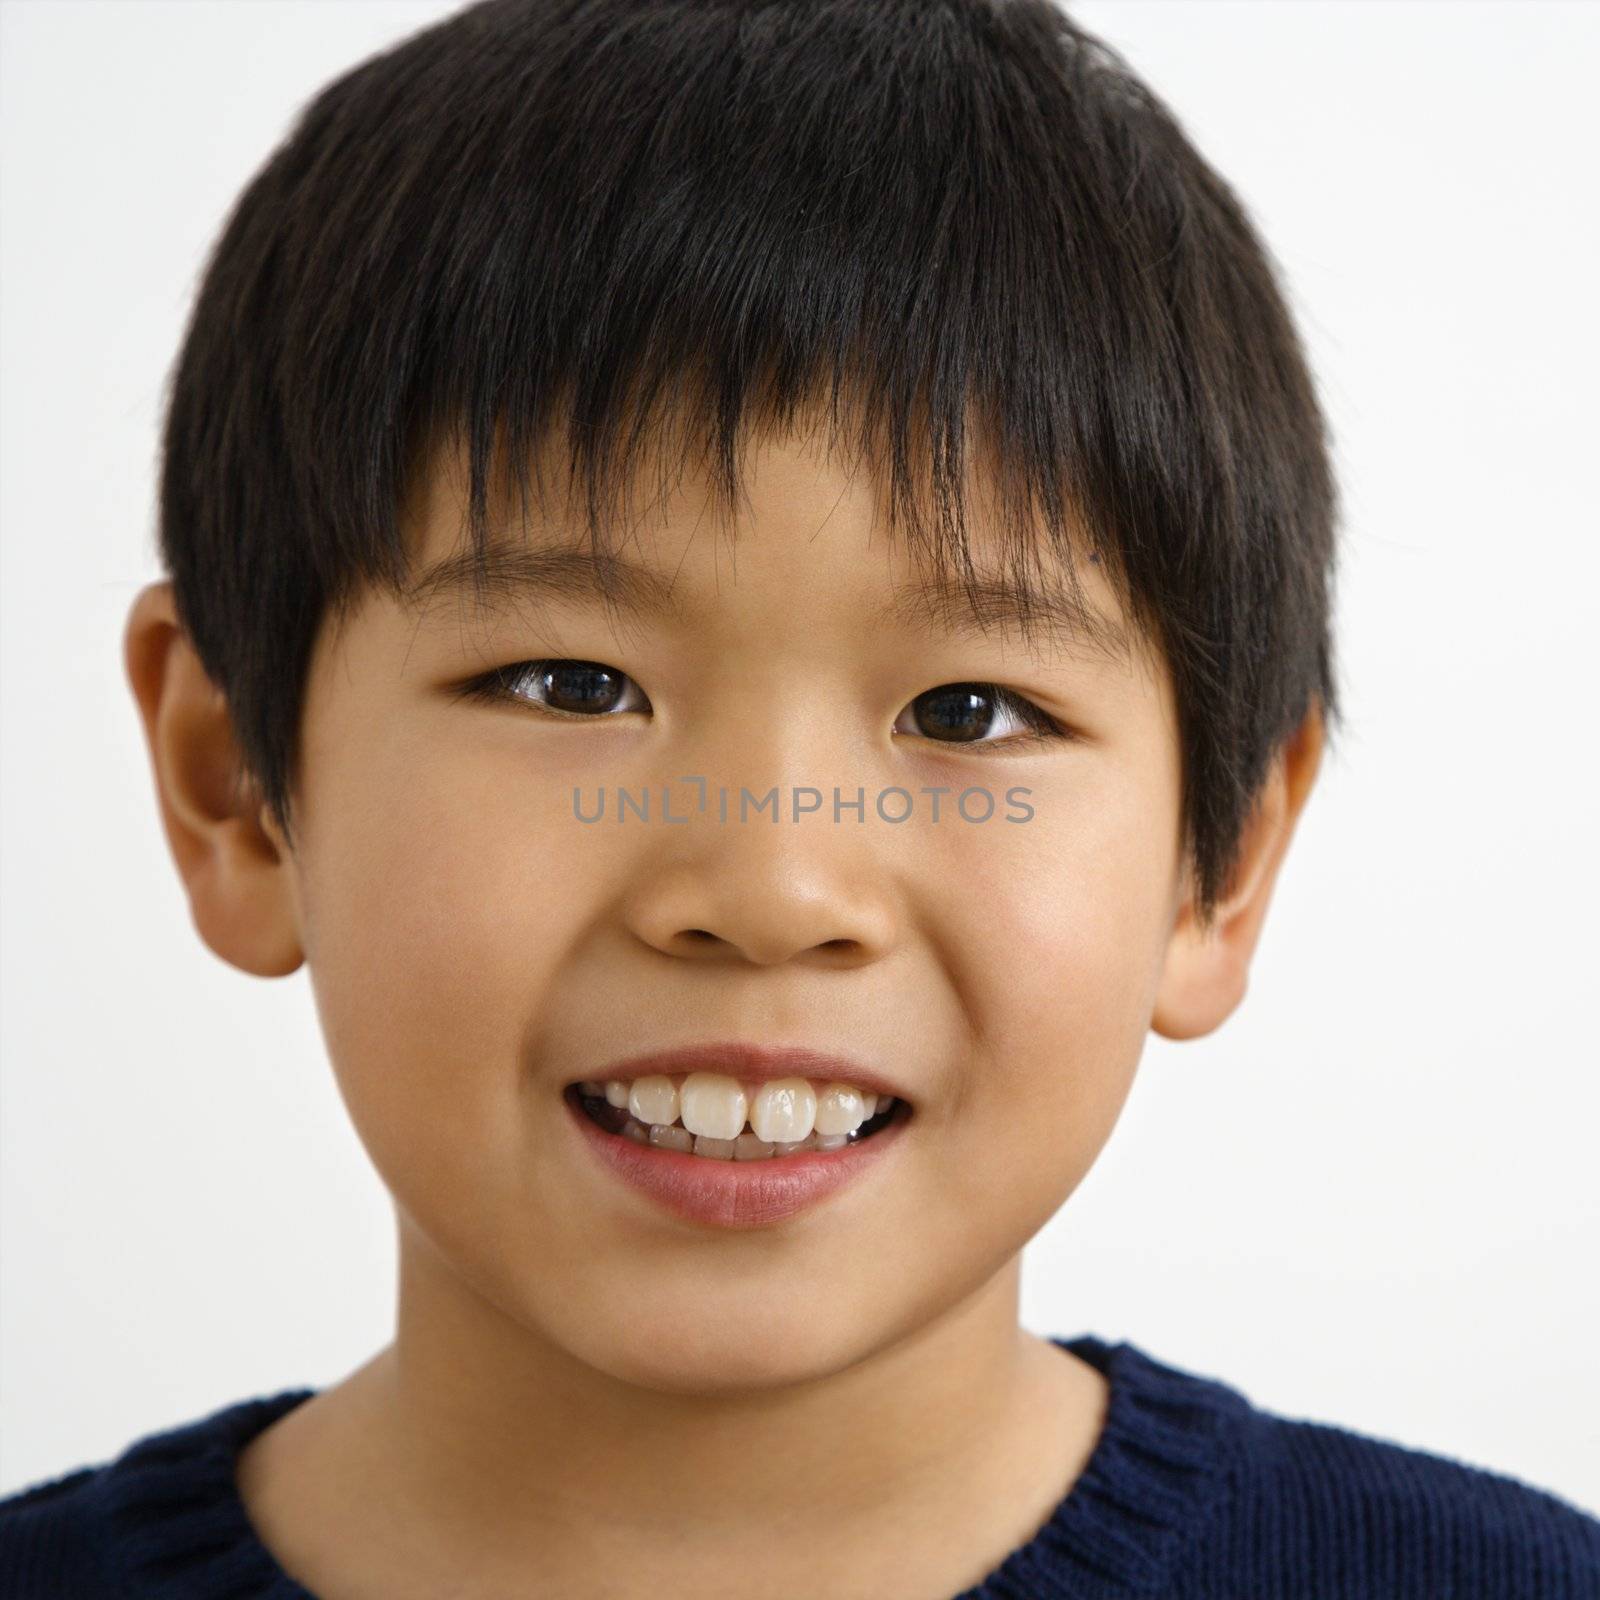 Portrait of young Asian boy smiling.